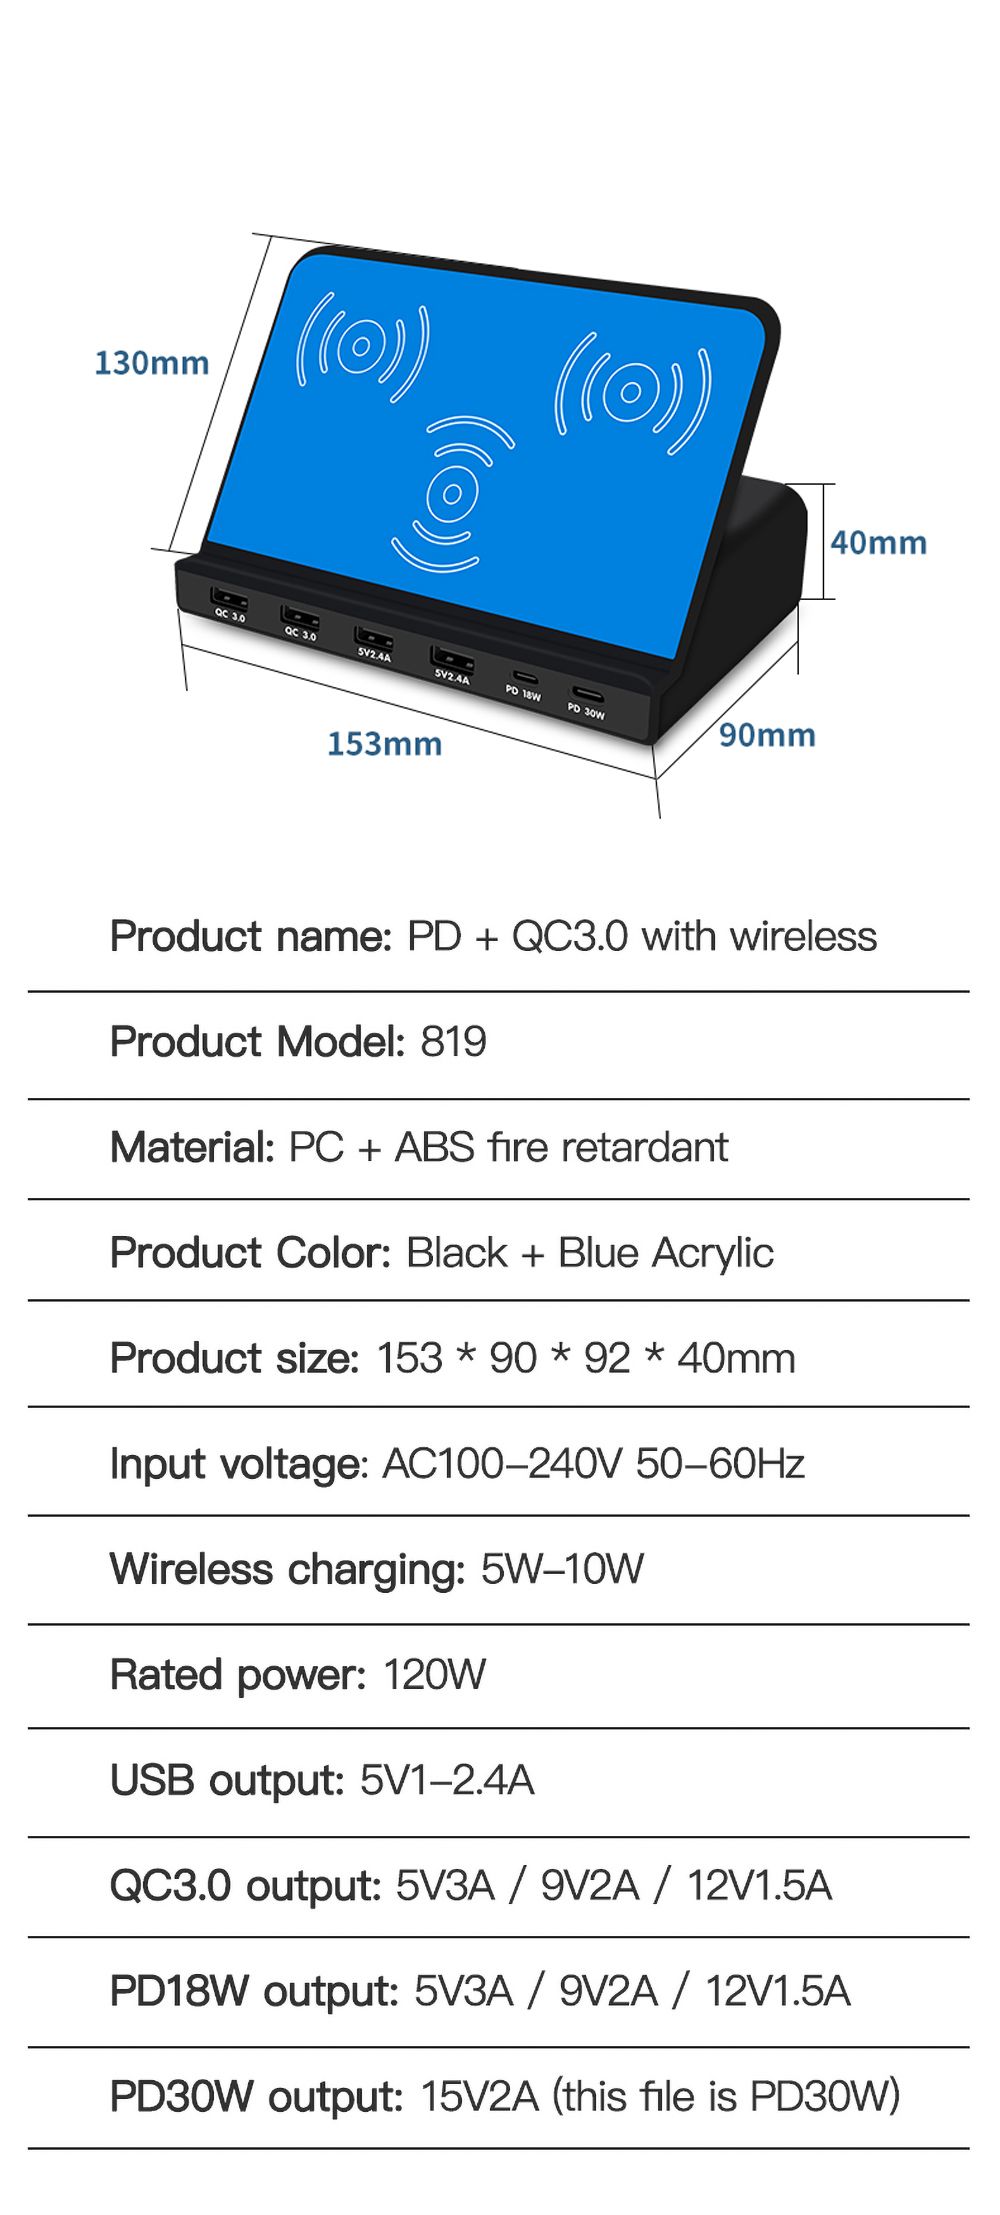 Bakeey-120W-USB-Charger-Desktop-Charging-Station-Dual-PD30-Power-Delivery-Dual-QC30-Quick-Charging-3-1711993